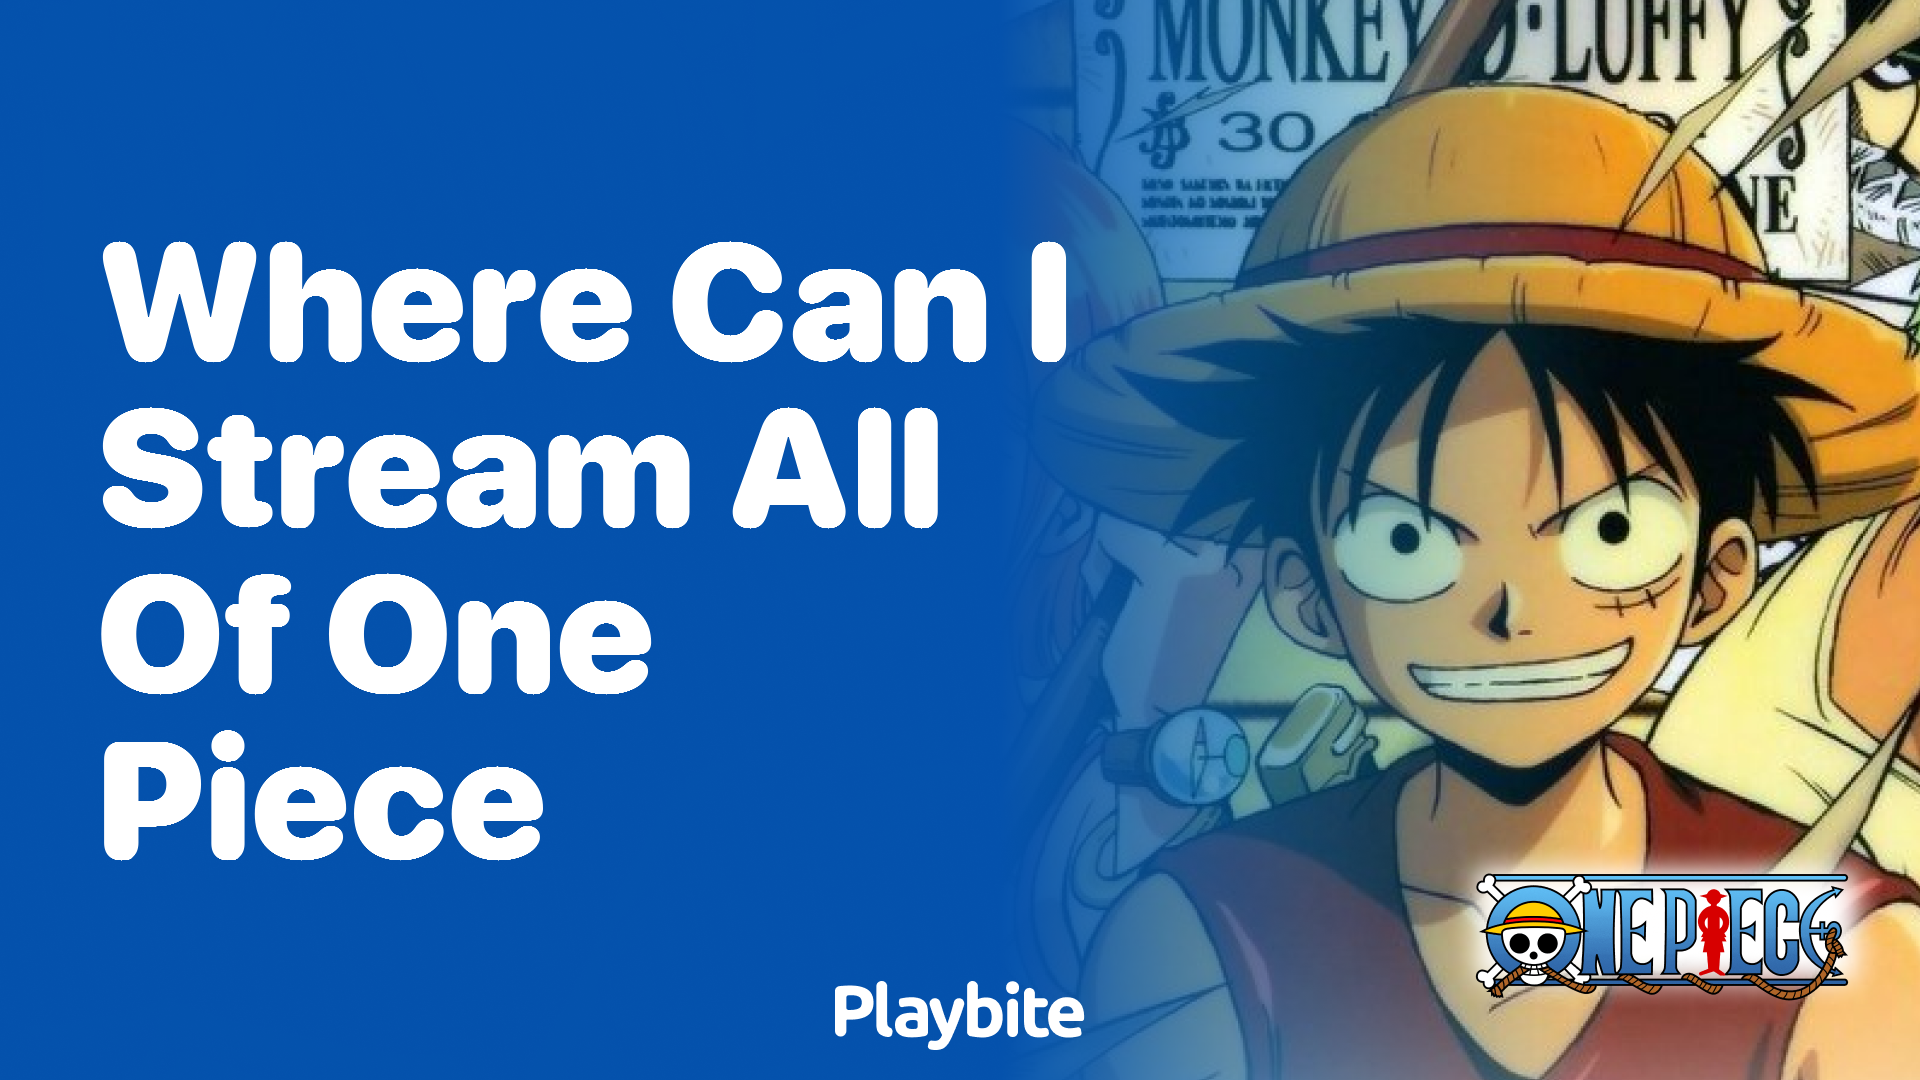 Where Can I Stream All of One Piece?